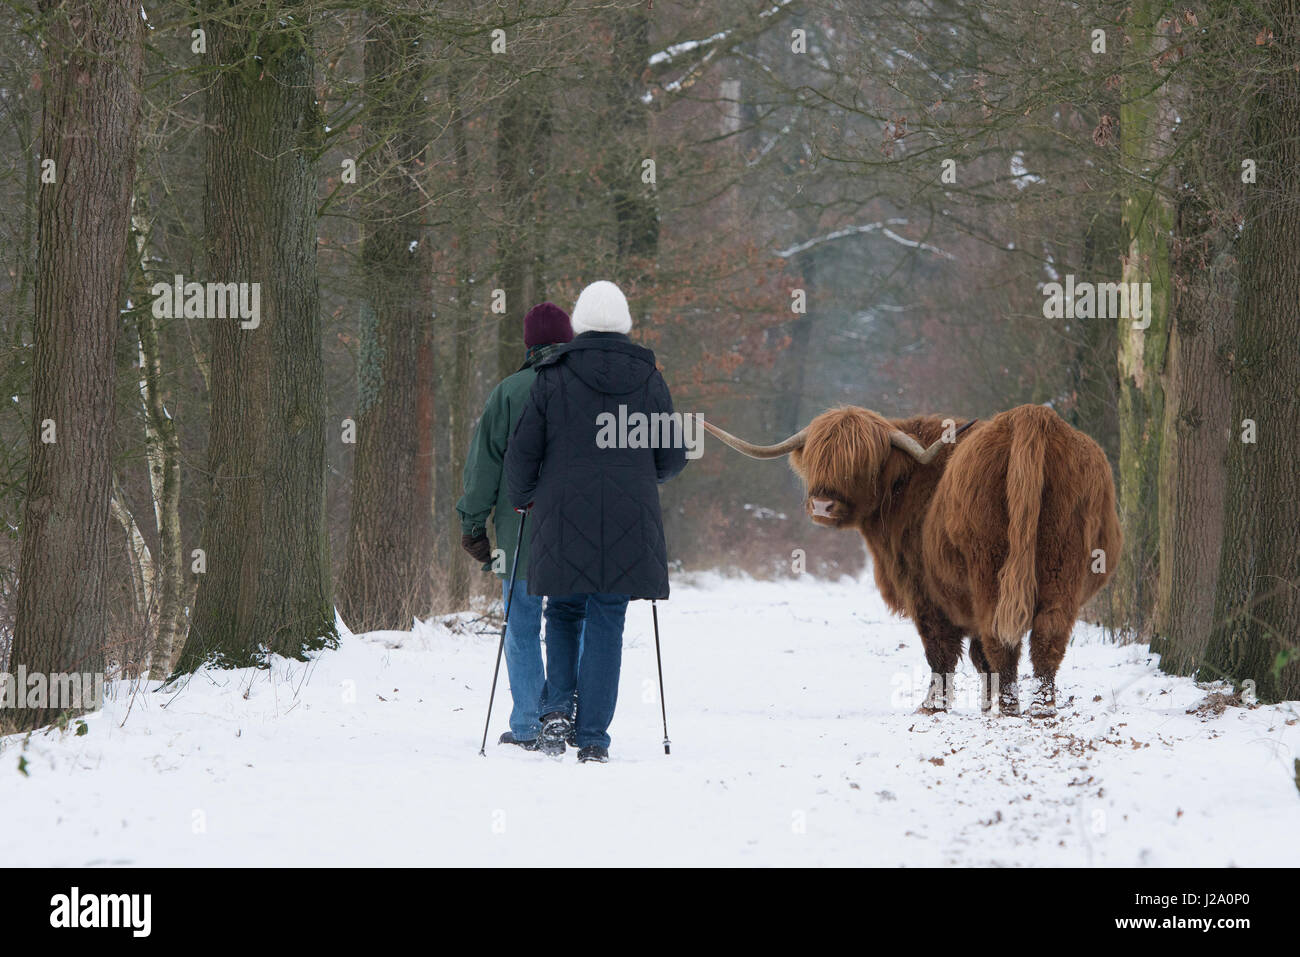 Two hikers meet a Highland cow on their path Stock Photo